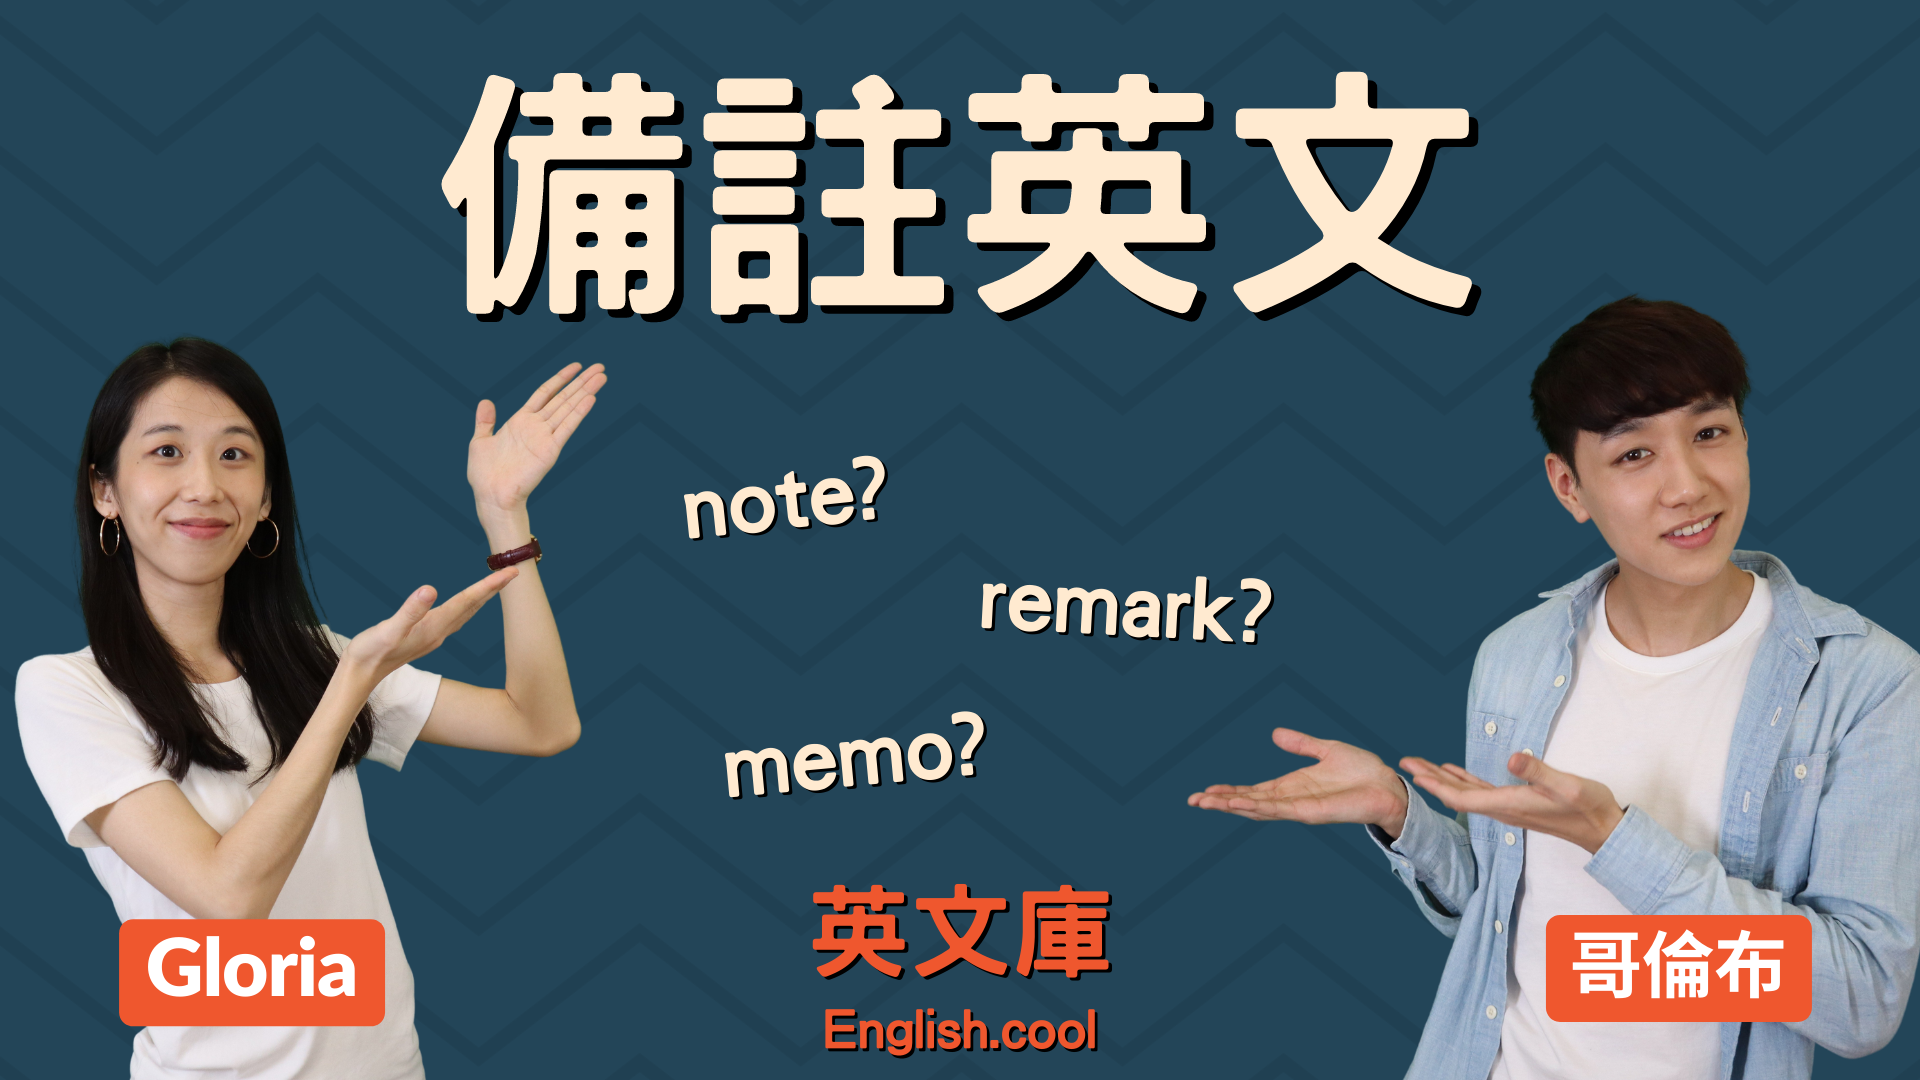 You are currently viewing 「備註」英文該用 note, remark, 還是 memo?